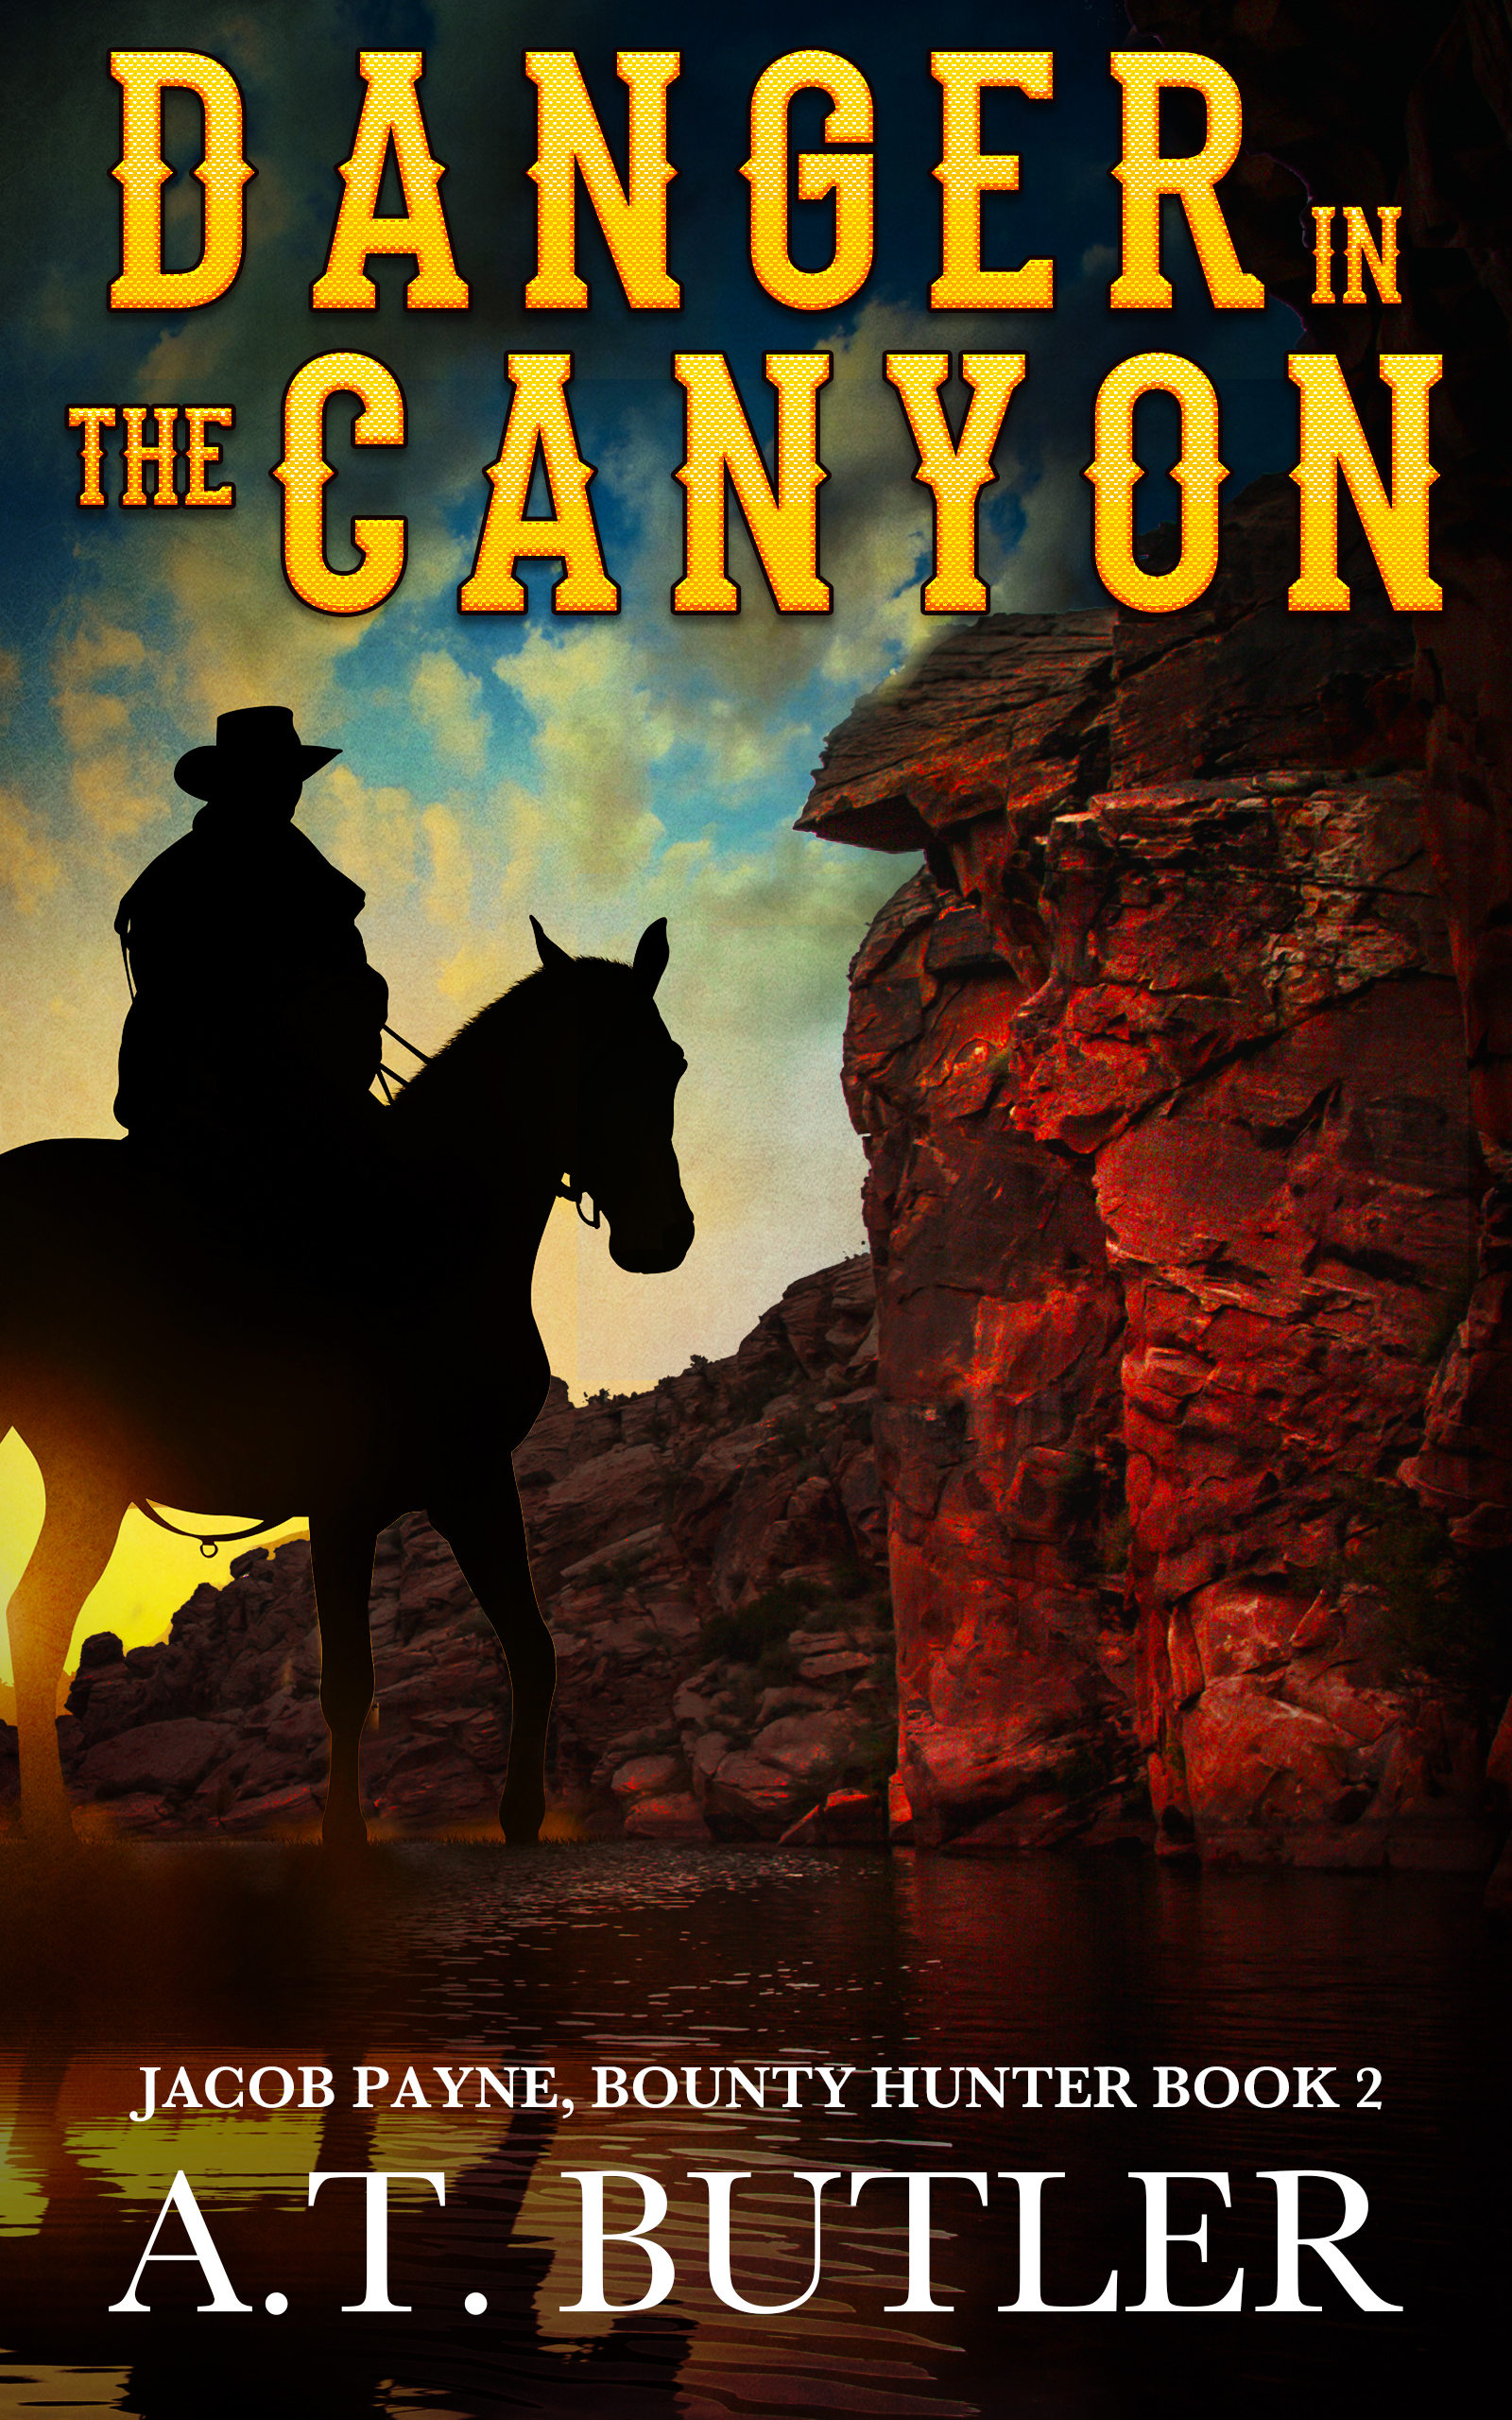 Danger in the Canyon